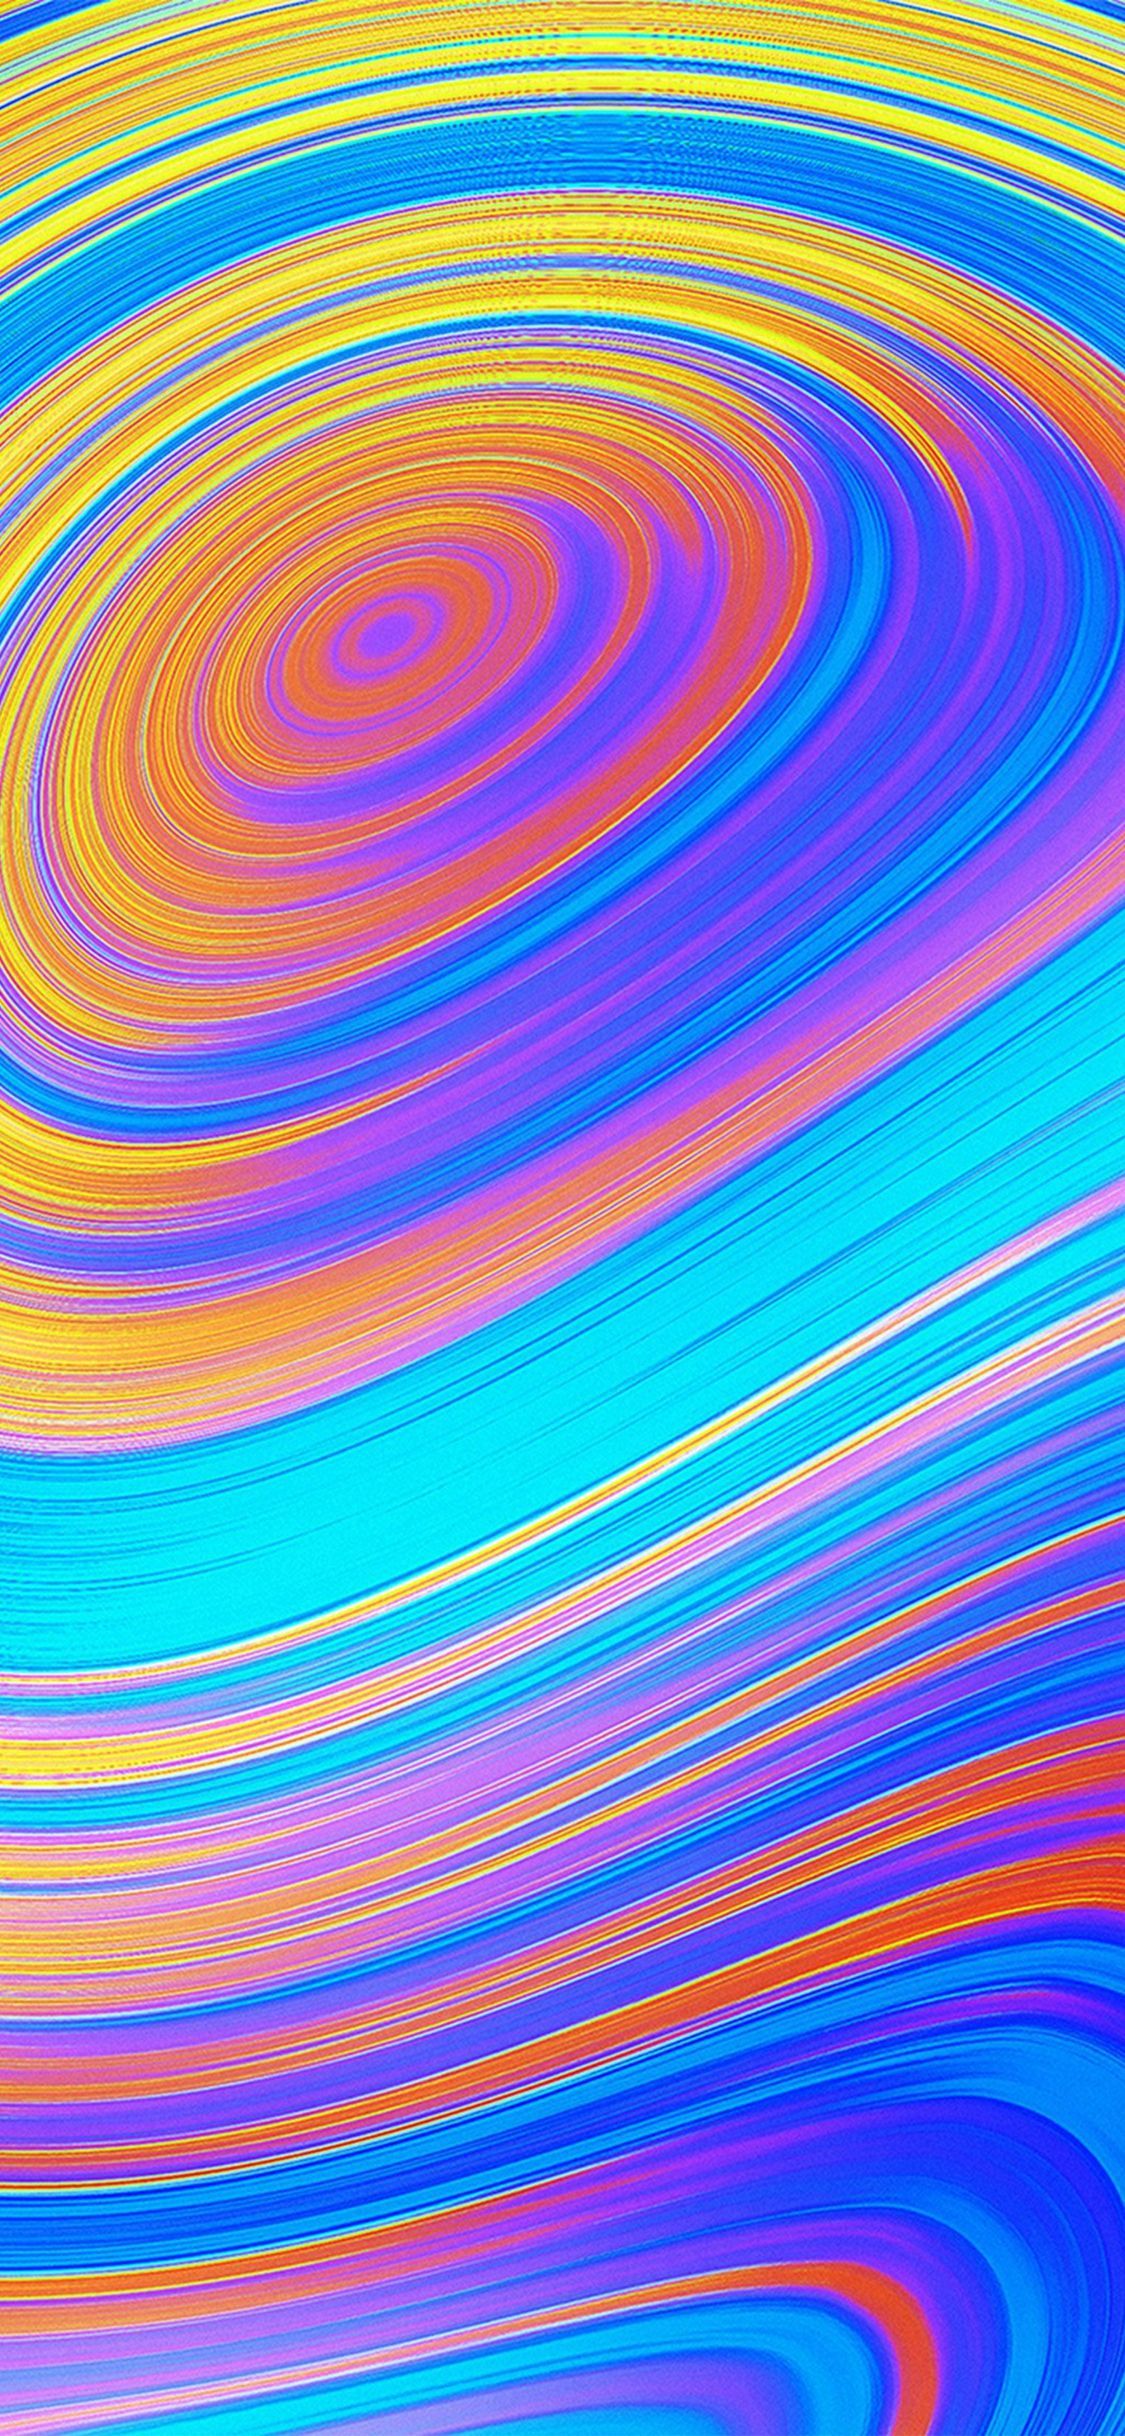 iPhone X-inspired wallpaper pack